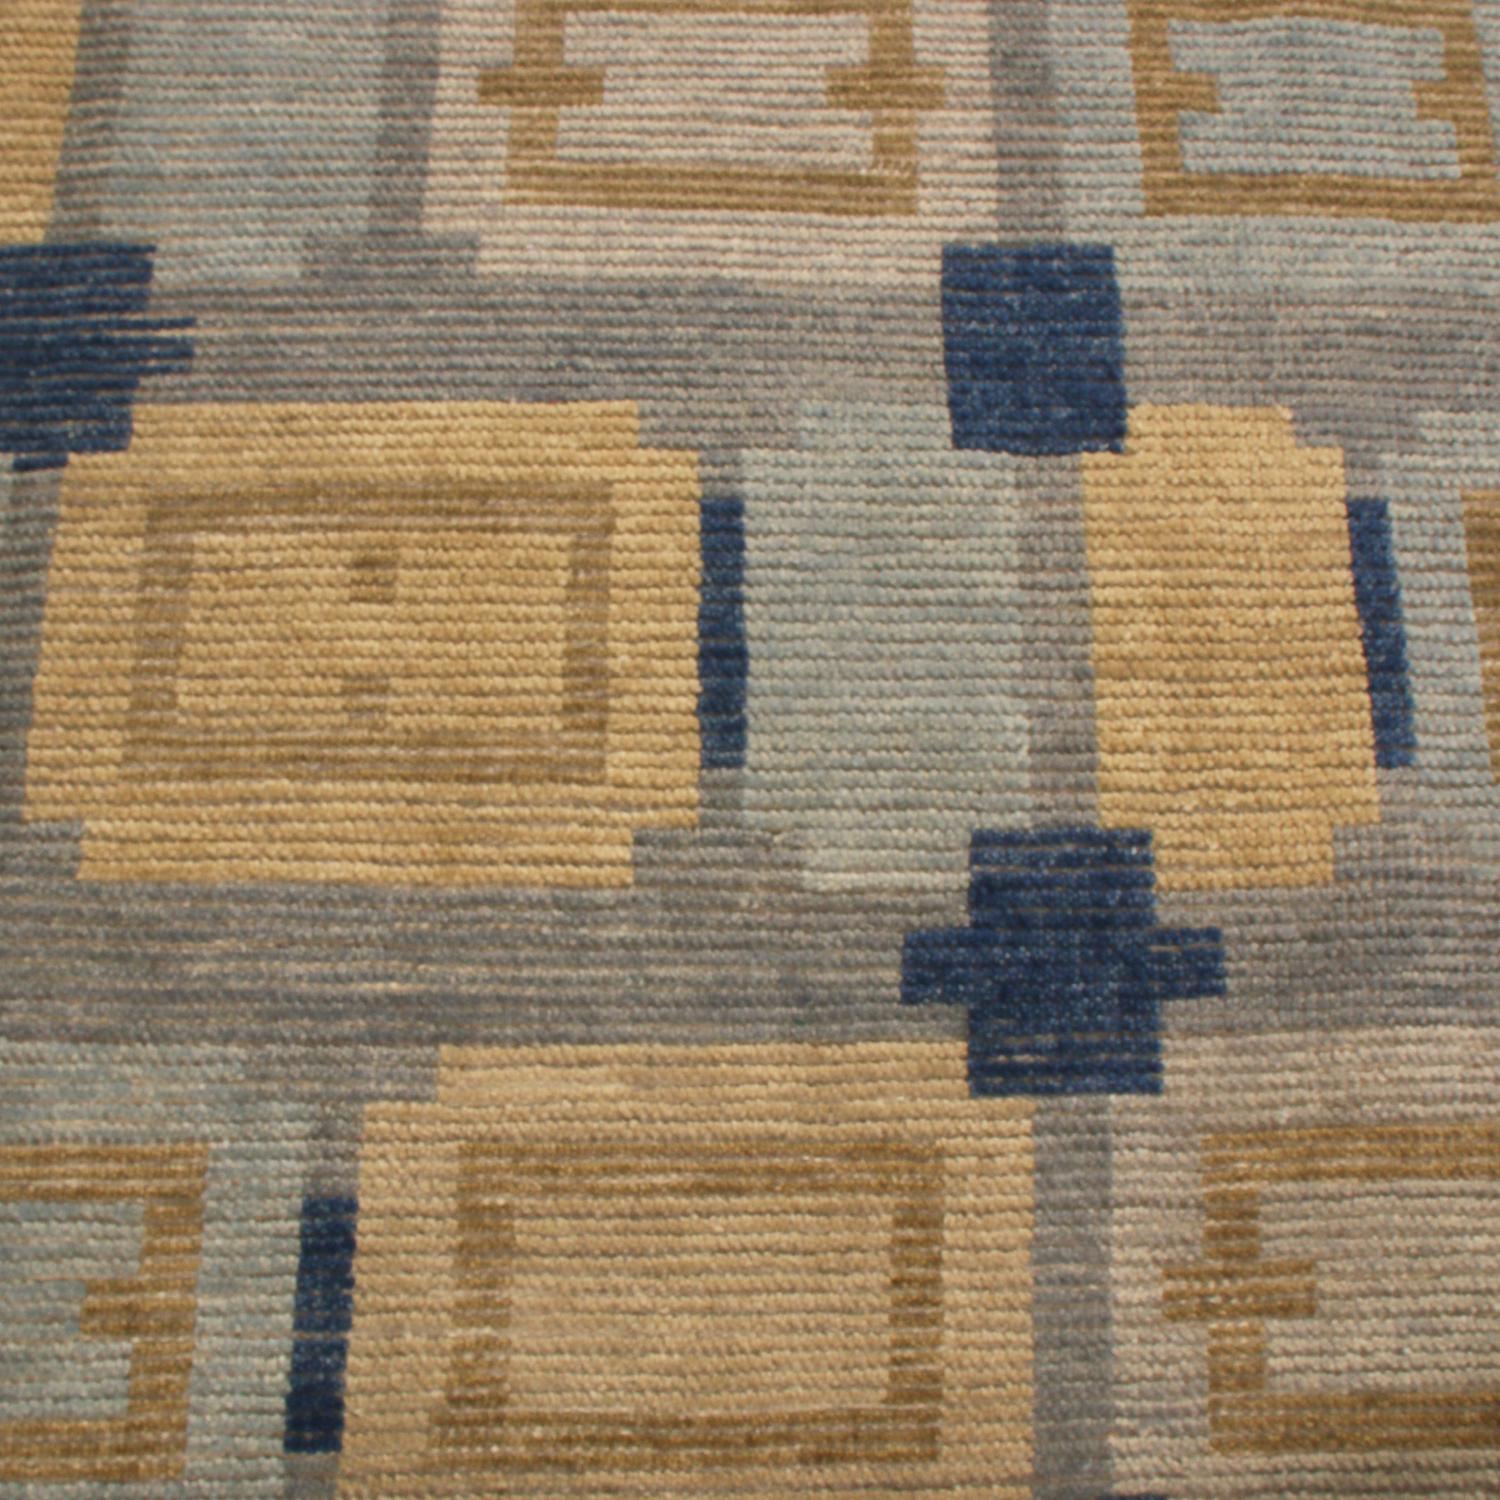 Indian Rug & Kilim’s Scandinavian-Inspired Geometric Gold Beige and Blue Wool Pile Rug For Sale